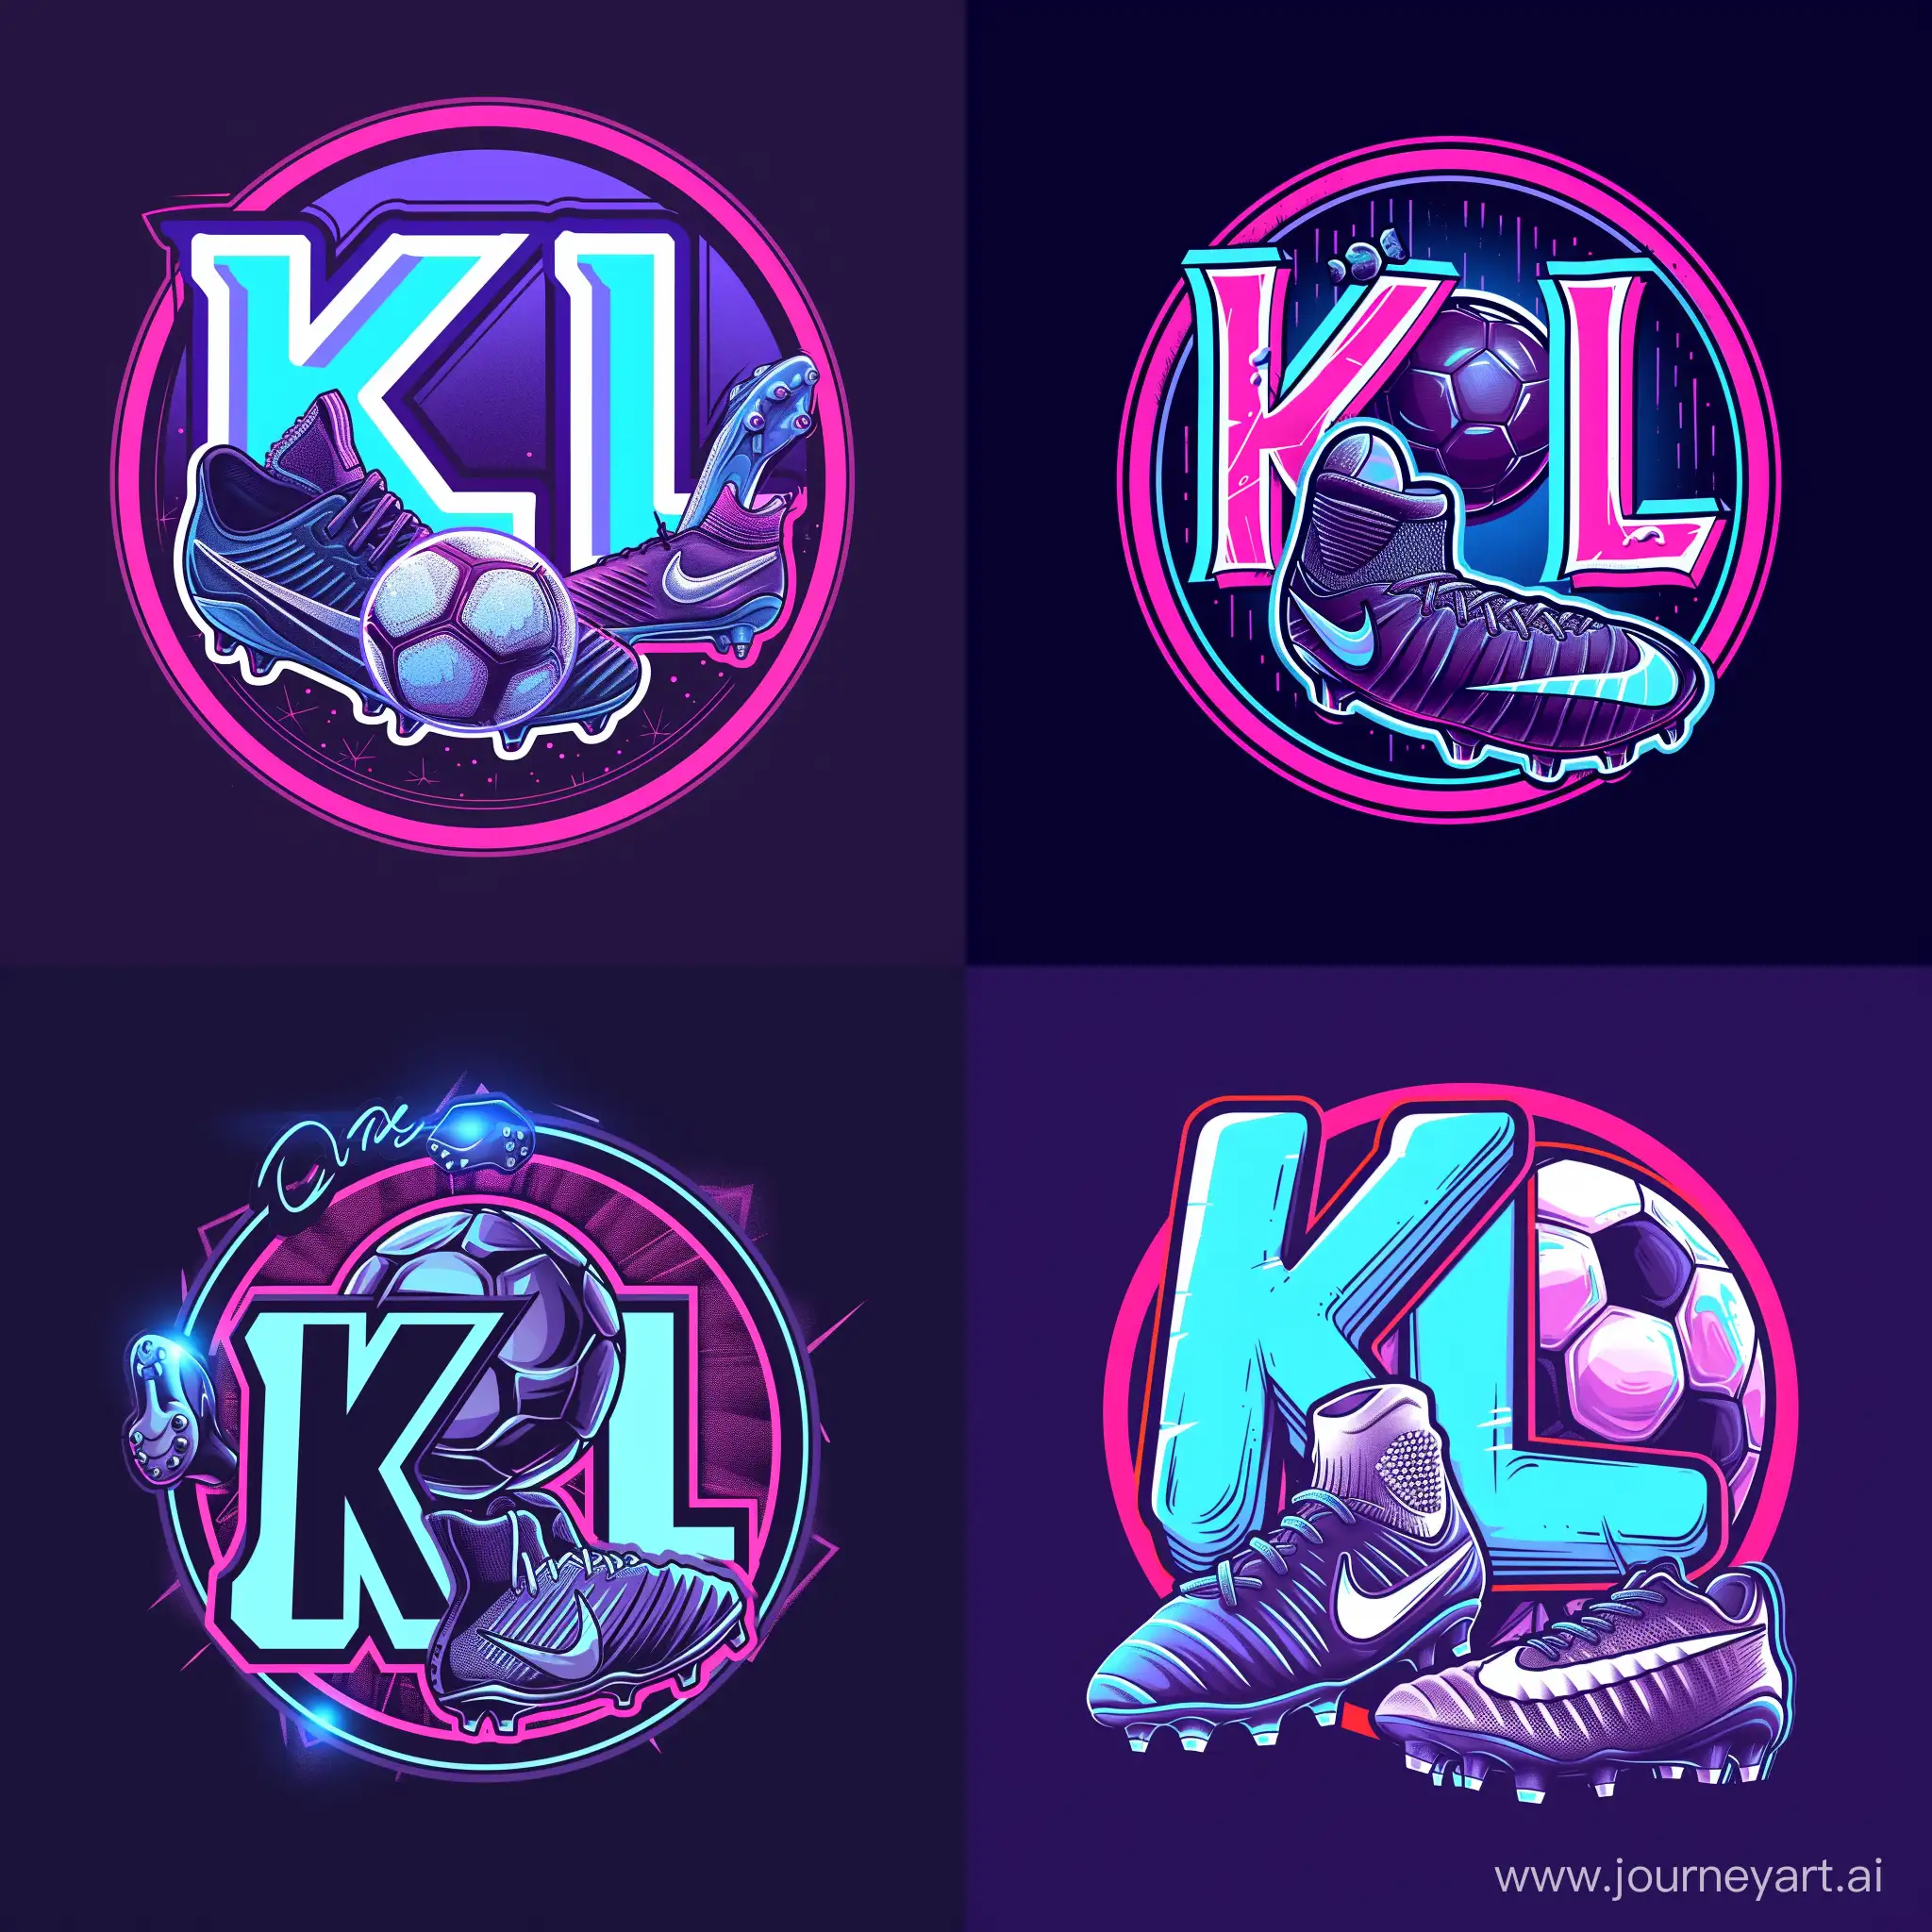 Brand logo for a company selling football boots, minimalist, KL lettering, illustration of a football ball and cleats around the large KL lettering, nike tiempo, purple blue pink neon colors